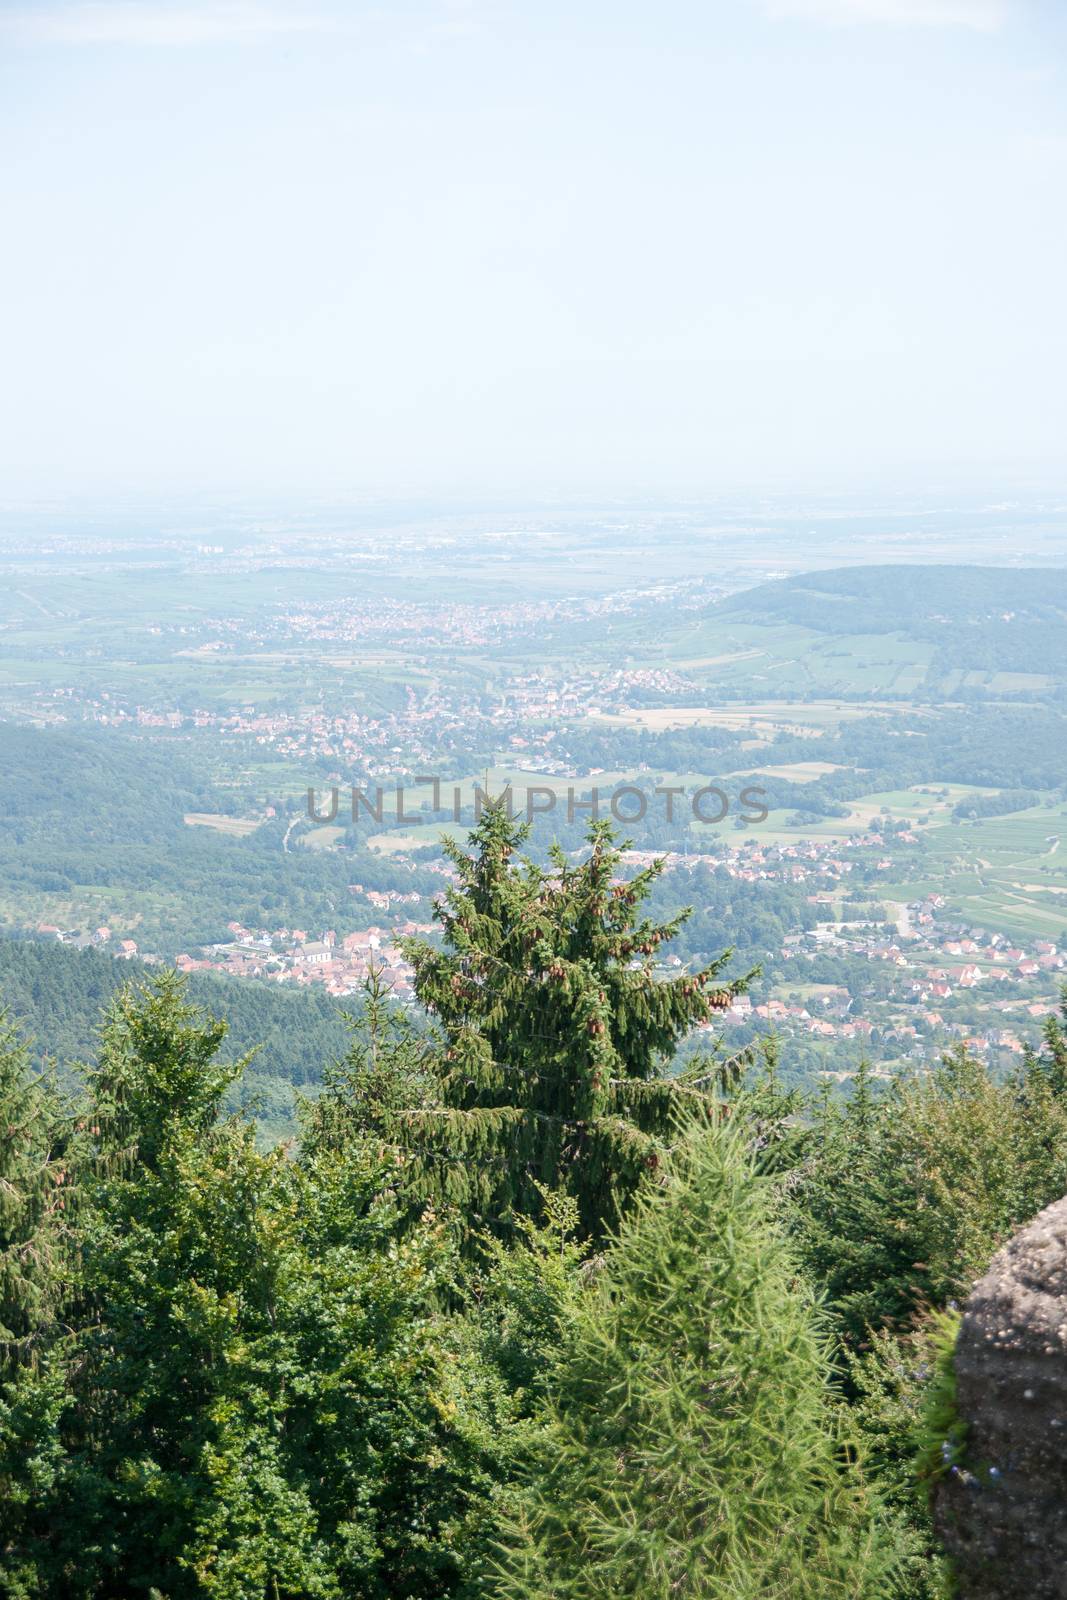 Alsace summer vacation on Mont st Odile mountain